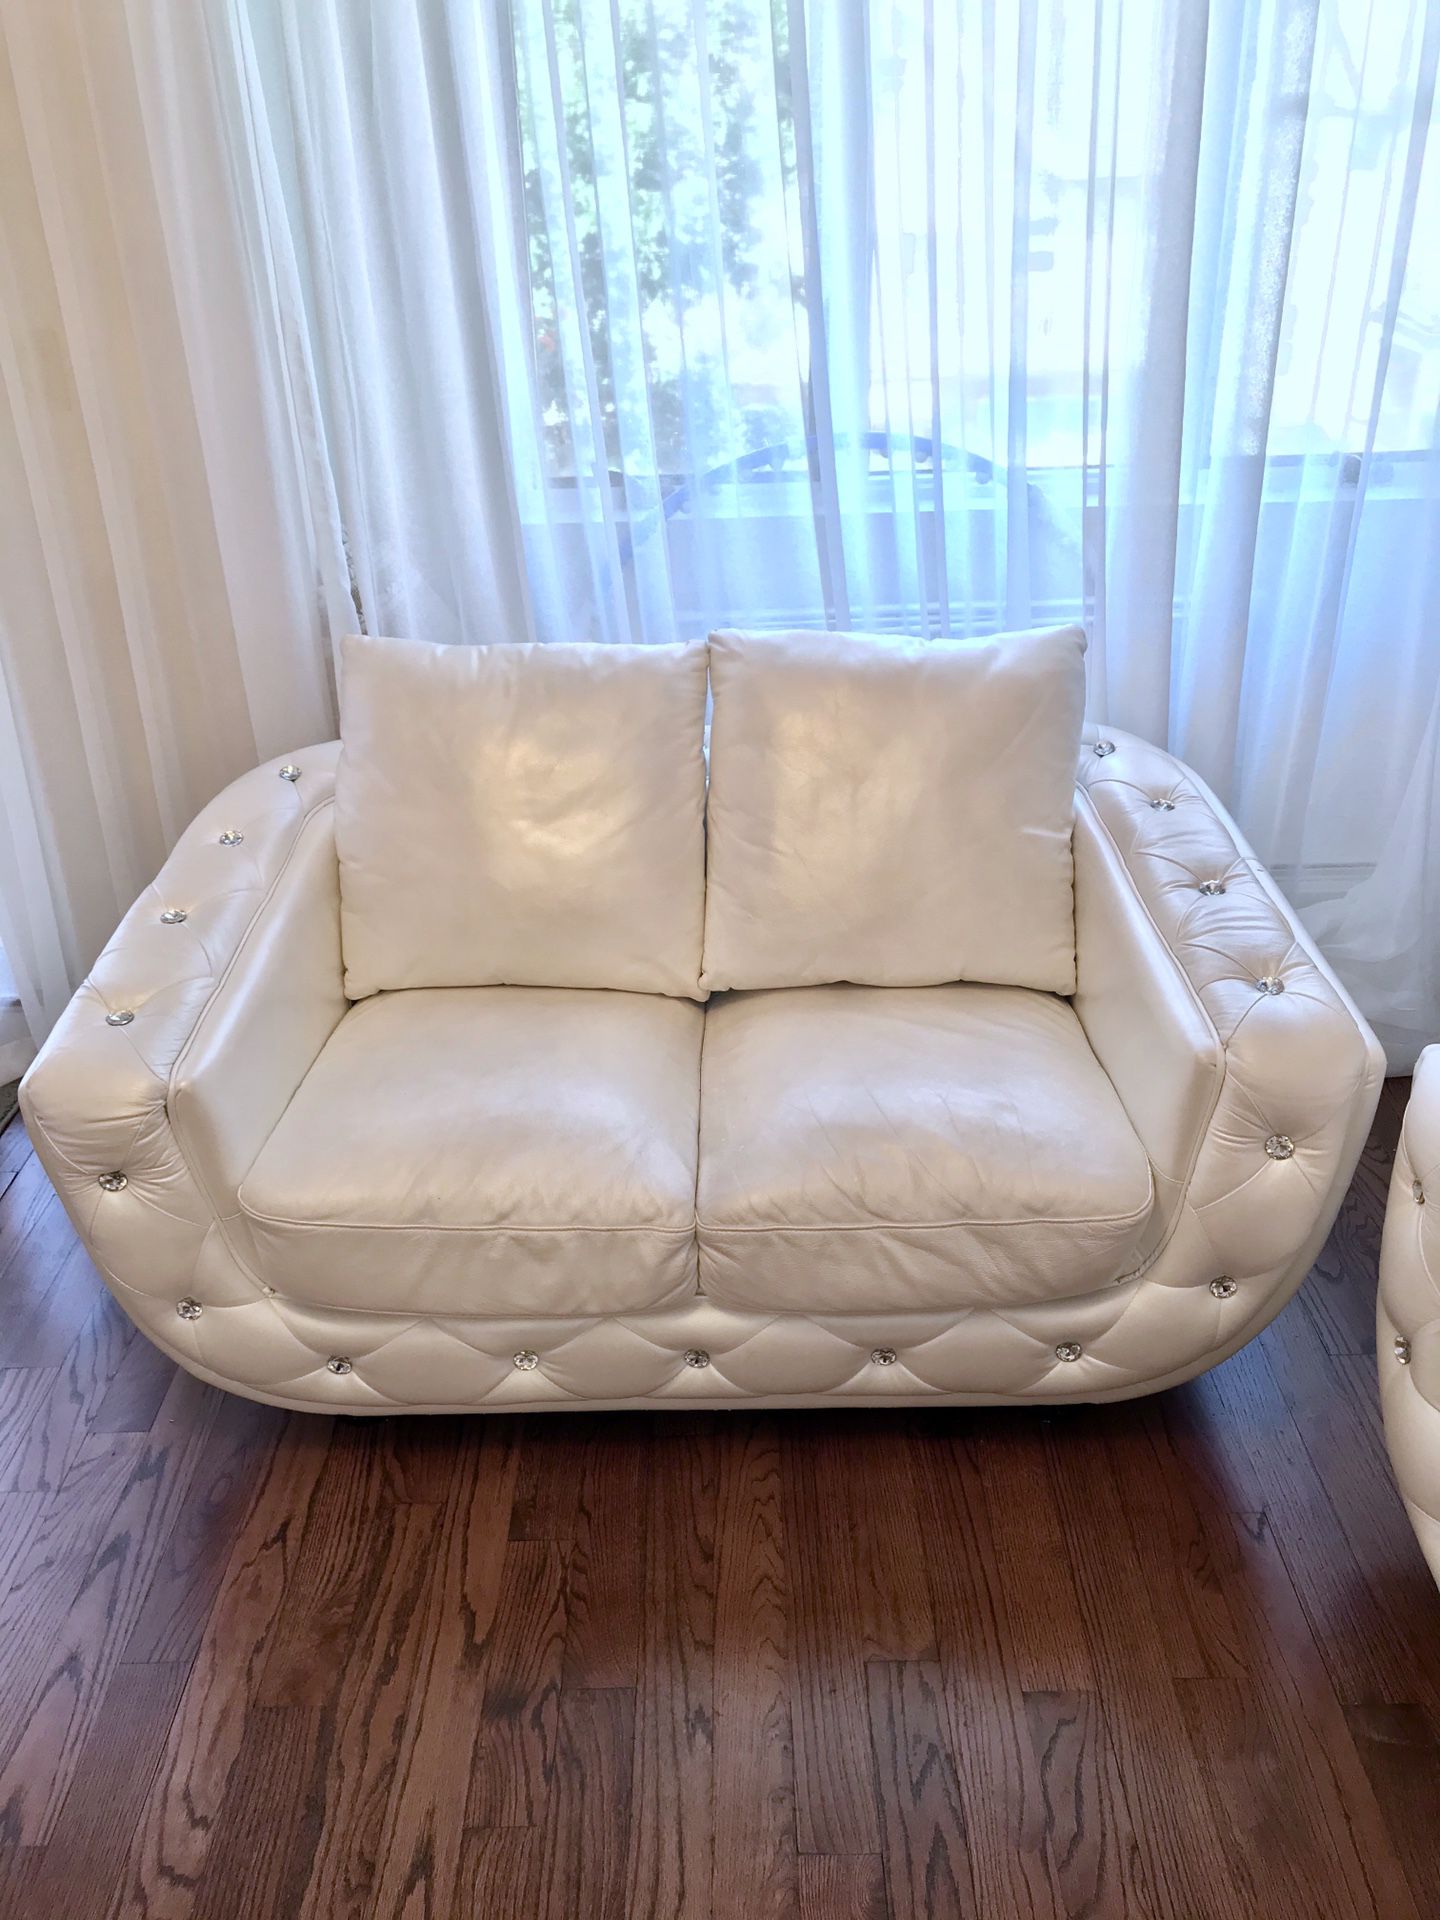 Embellished white Leather couch set retails $2200!